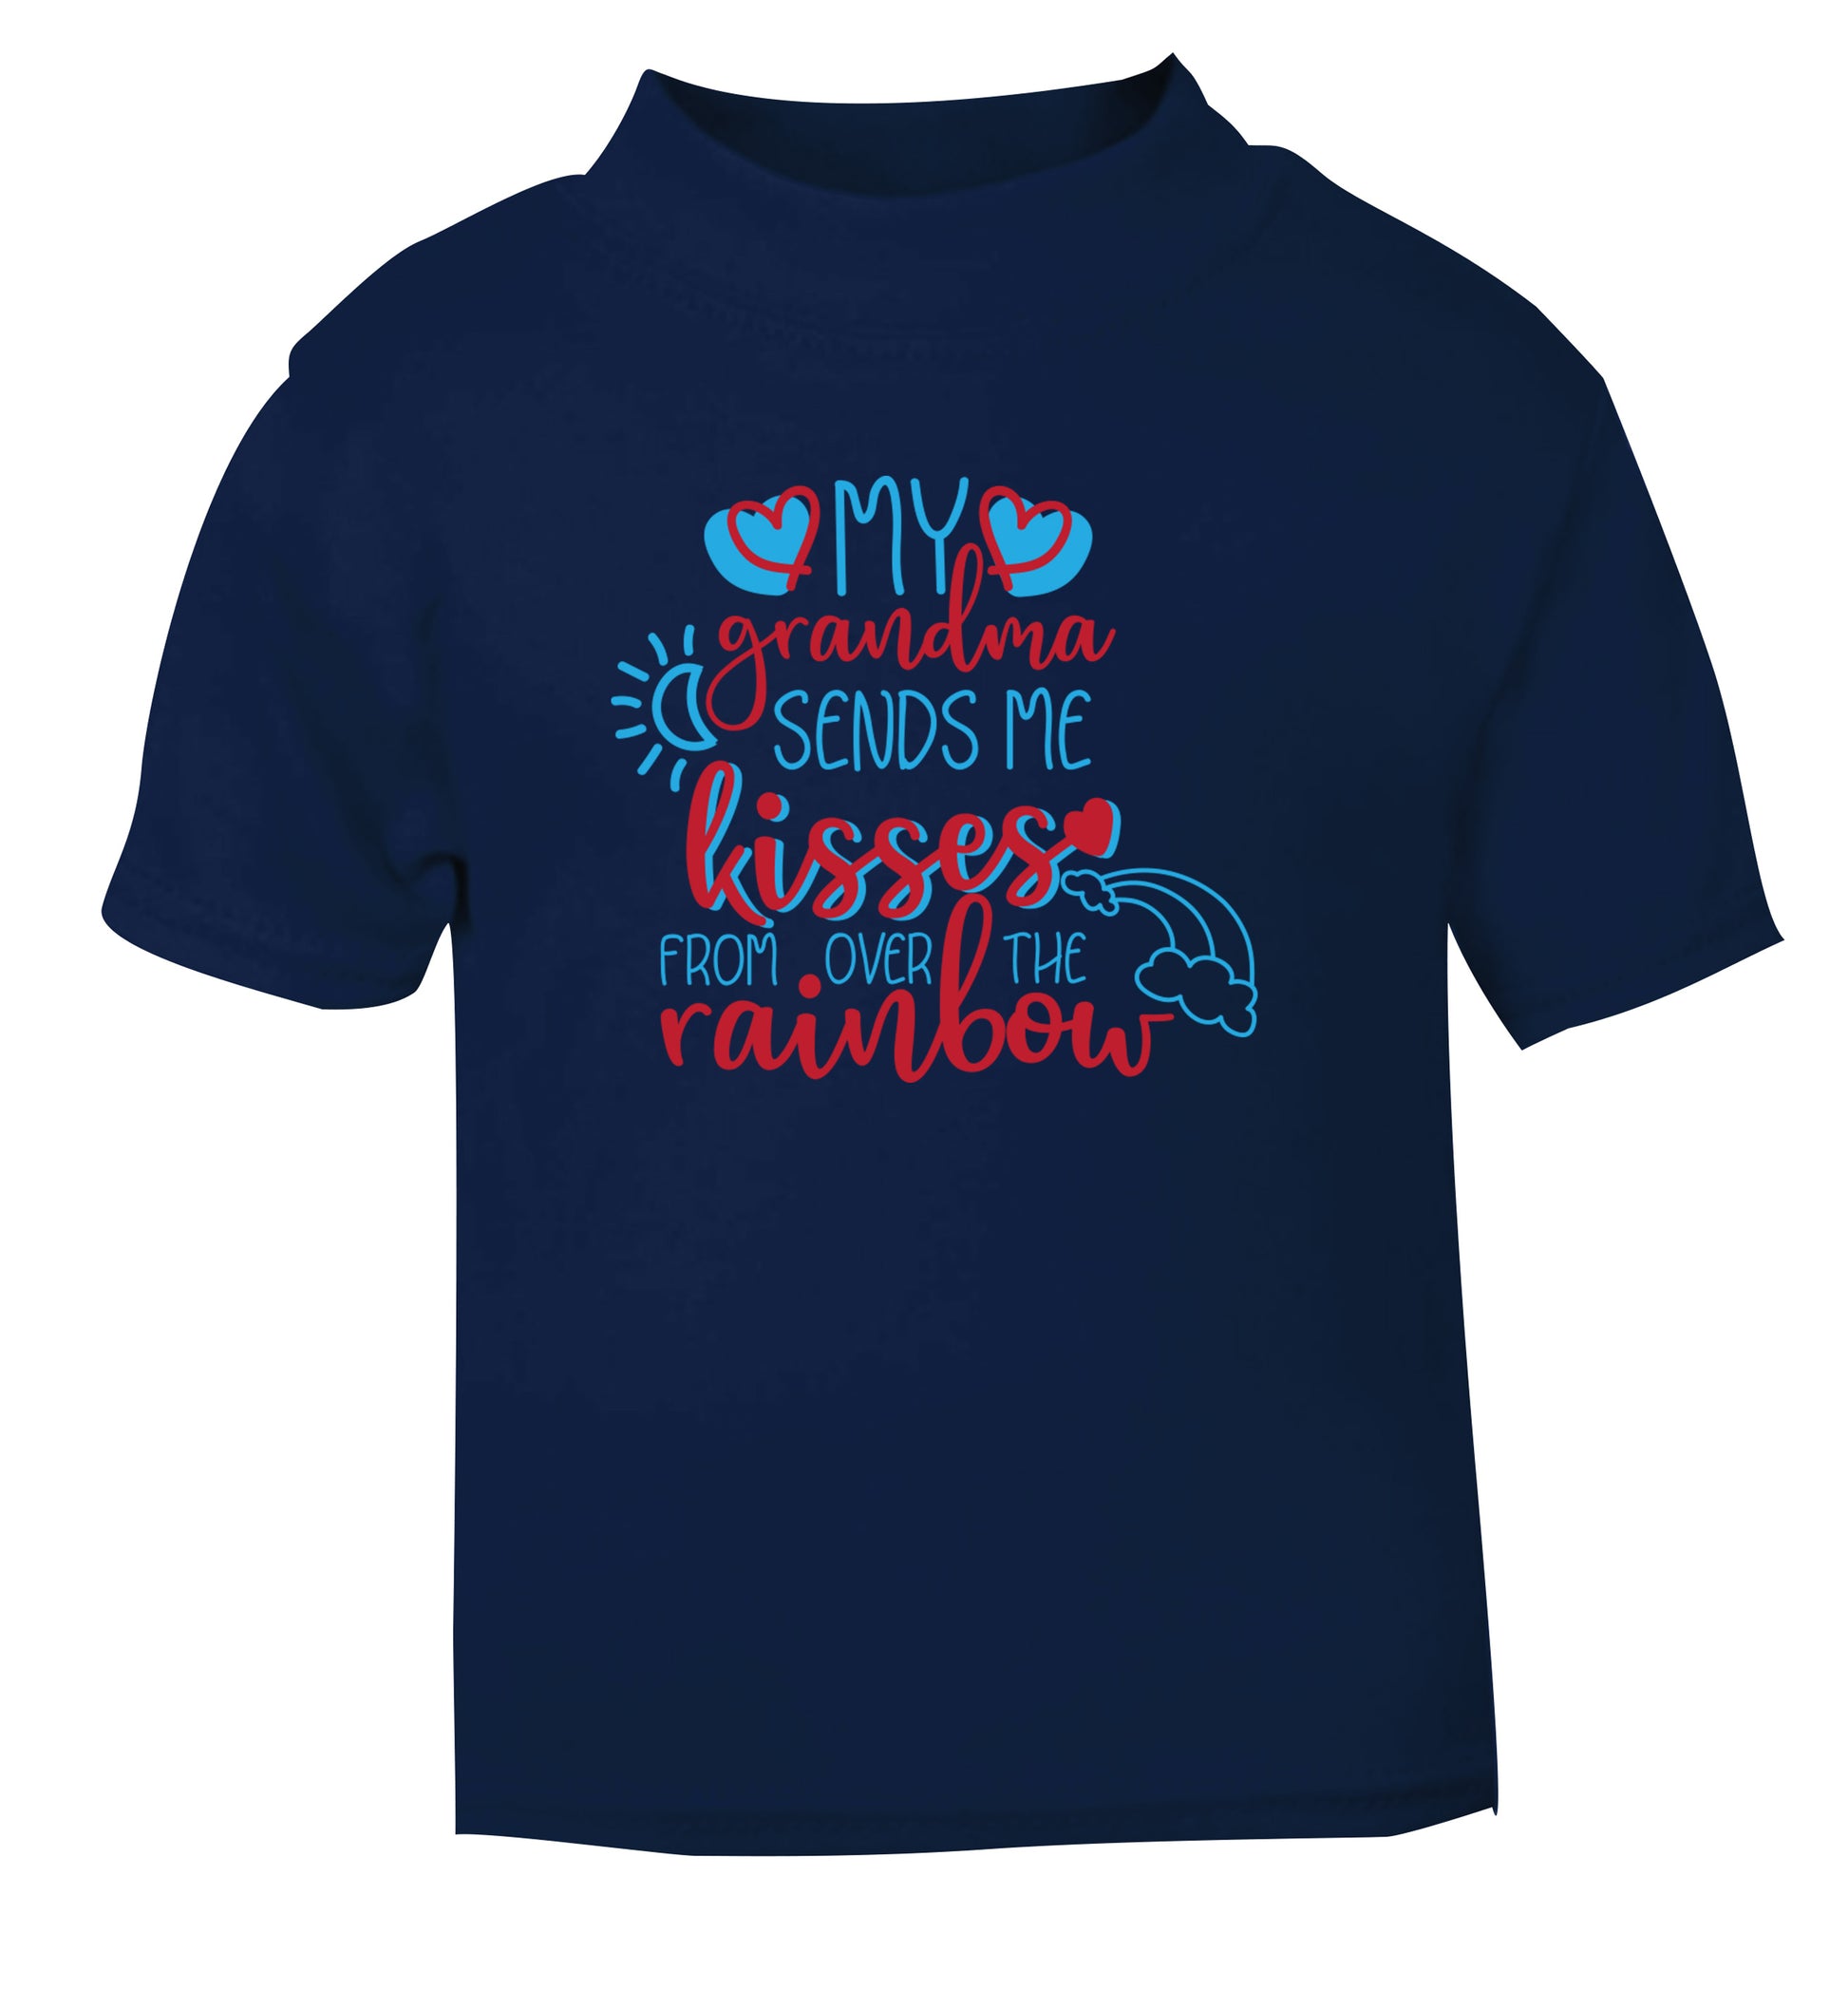 My grandma sends me kisses from over the rainbow navy Baby Toddler Tshirt 2 Years